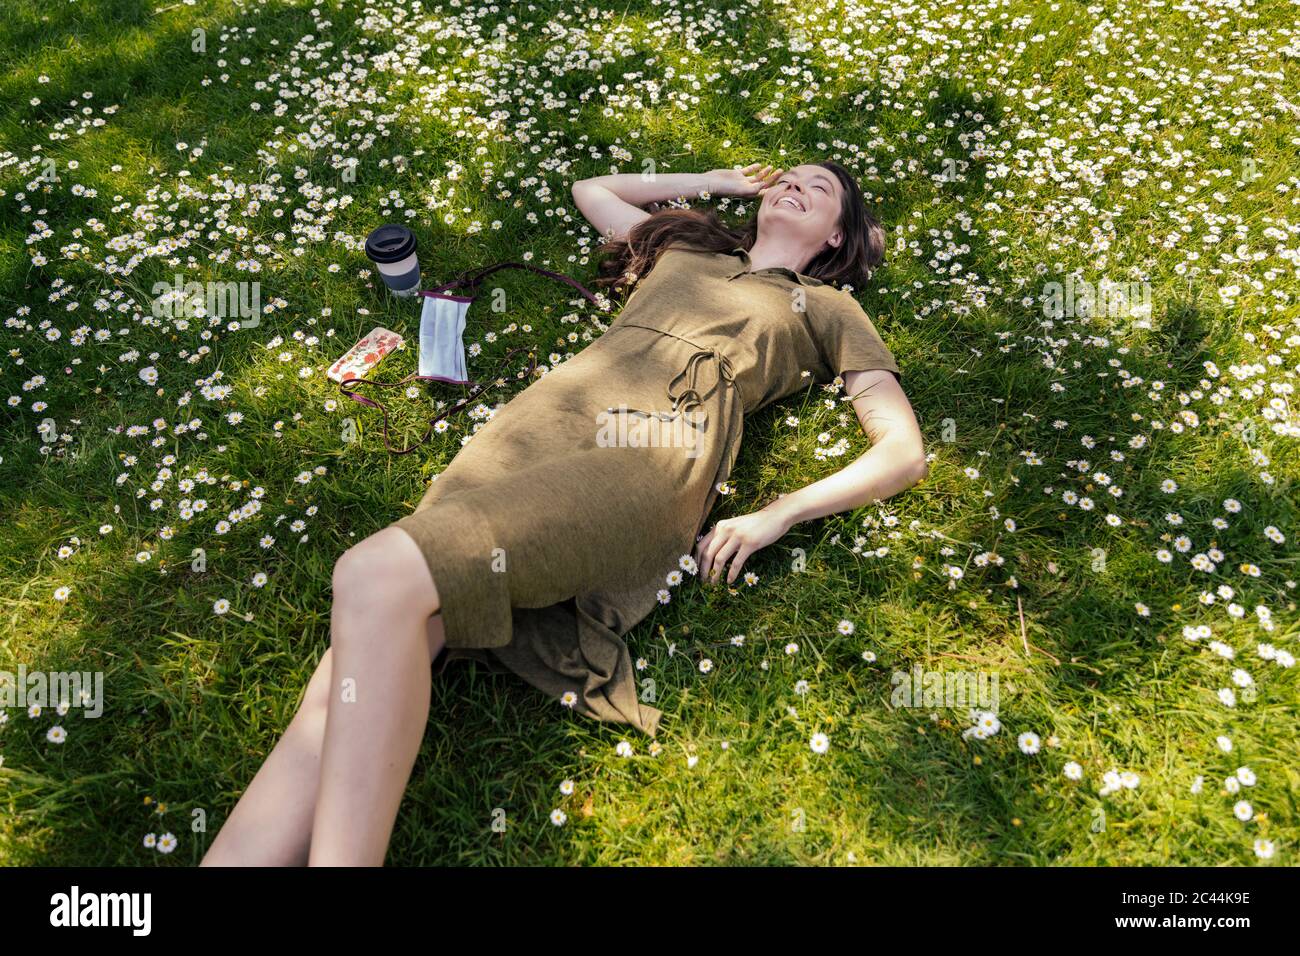 Happy woman enjoying her free time while lying on grass with daisies next to face mask Stock Photo